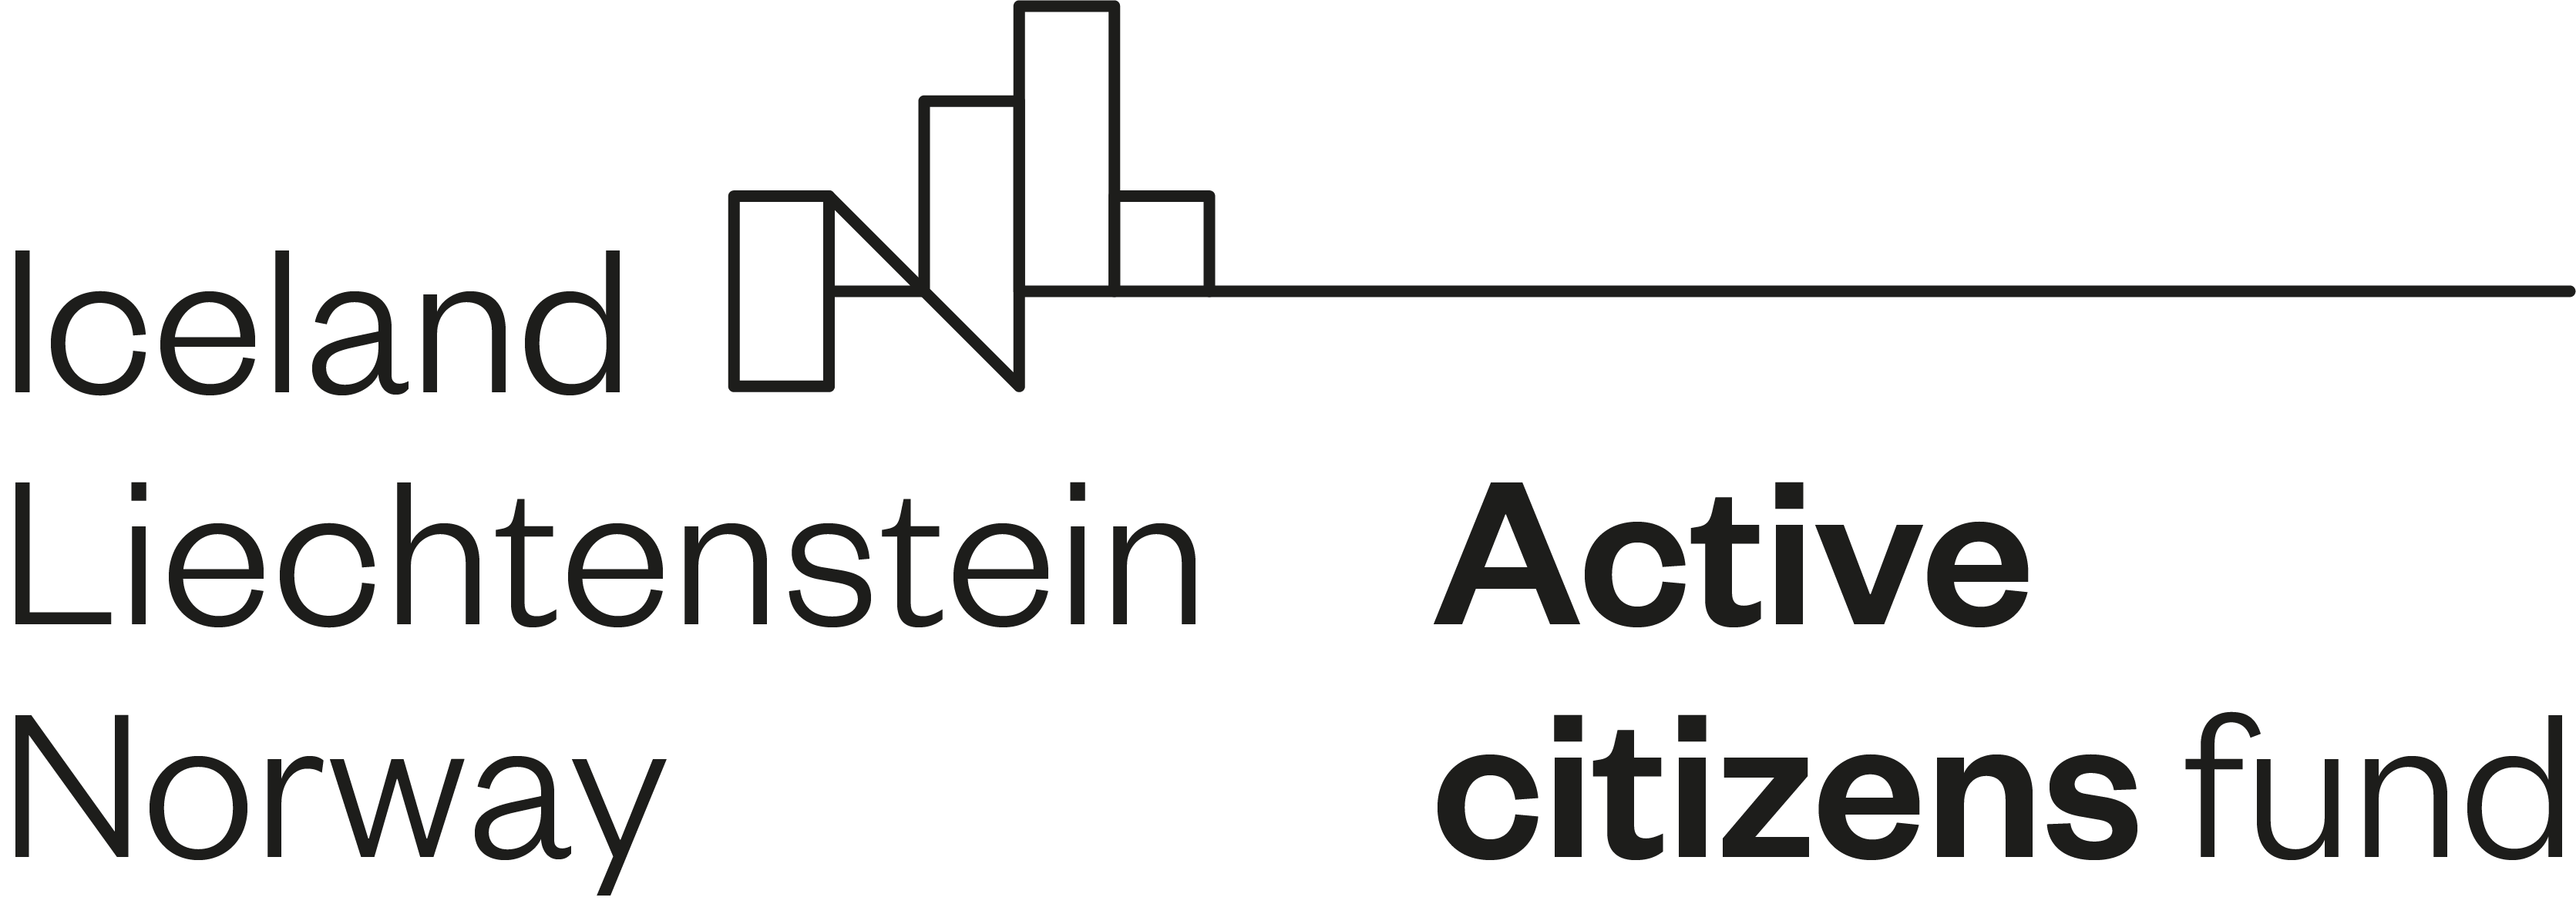 Active-citizens-fund4xpng